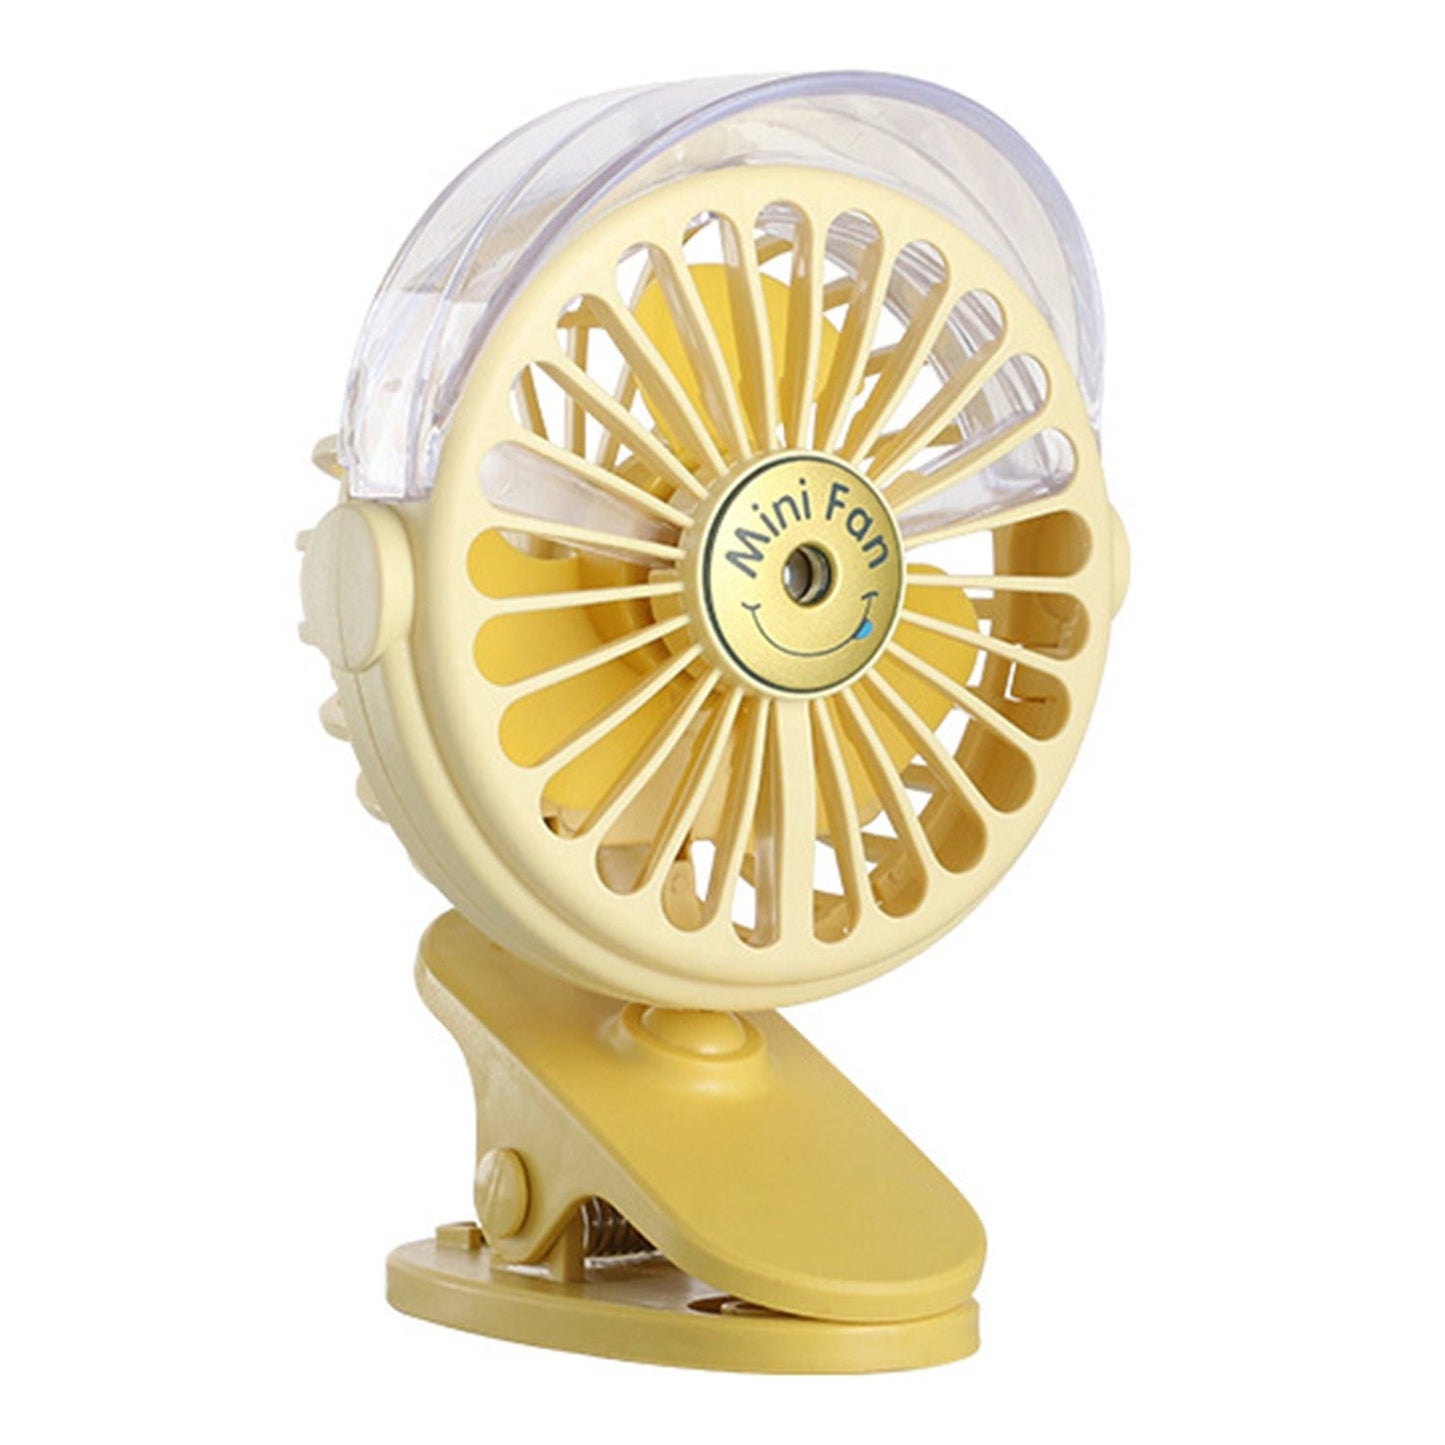 4824A Clip Desk Fan with Small Spray Bottle, Portable Wind Desktop Table Cooling Fan in Single Button, Adjustment Mini Personal Fan for Home Desktop Office Car Indoor Outdoor Travel Dukandaily